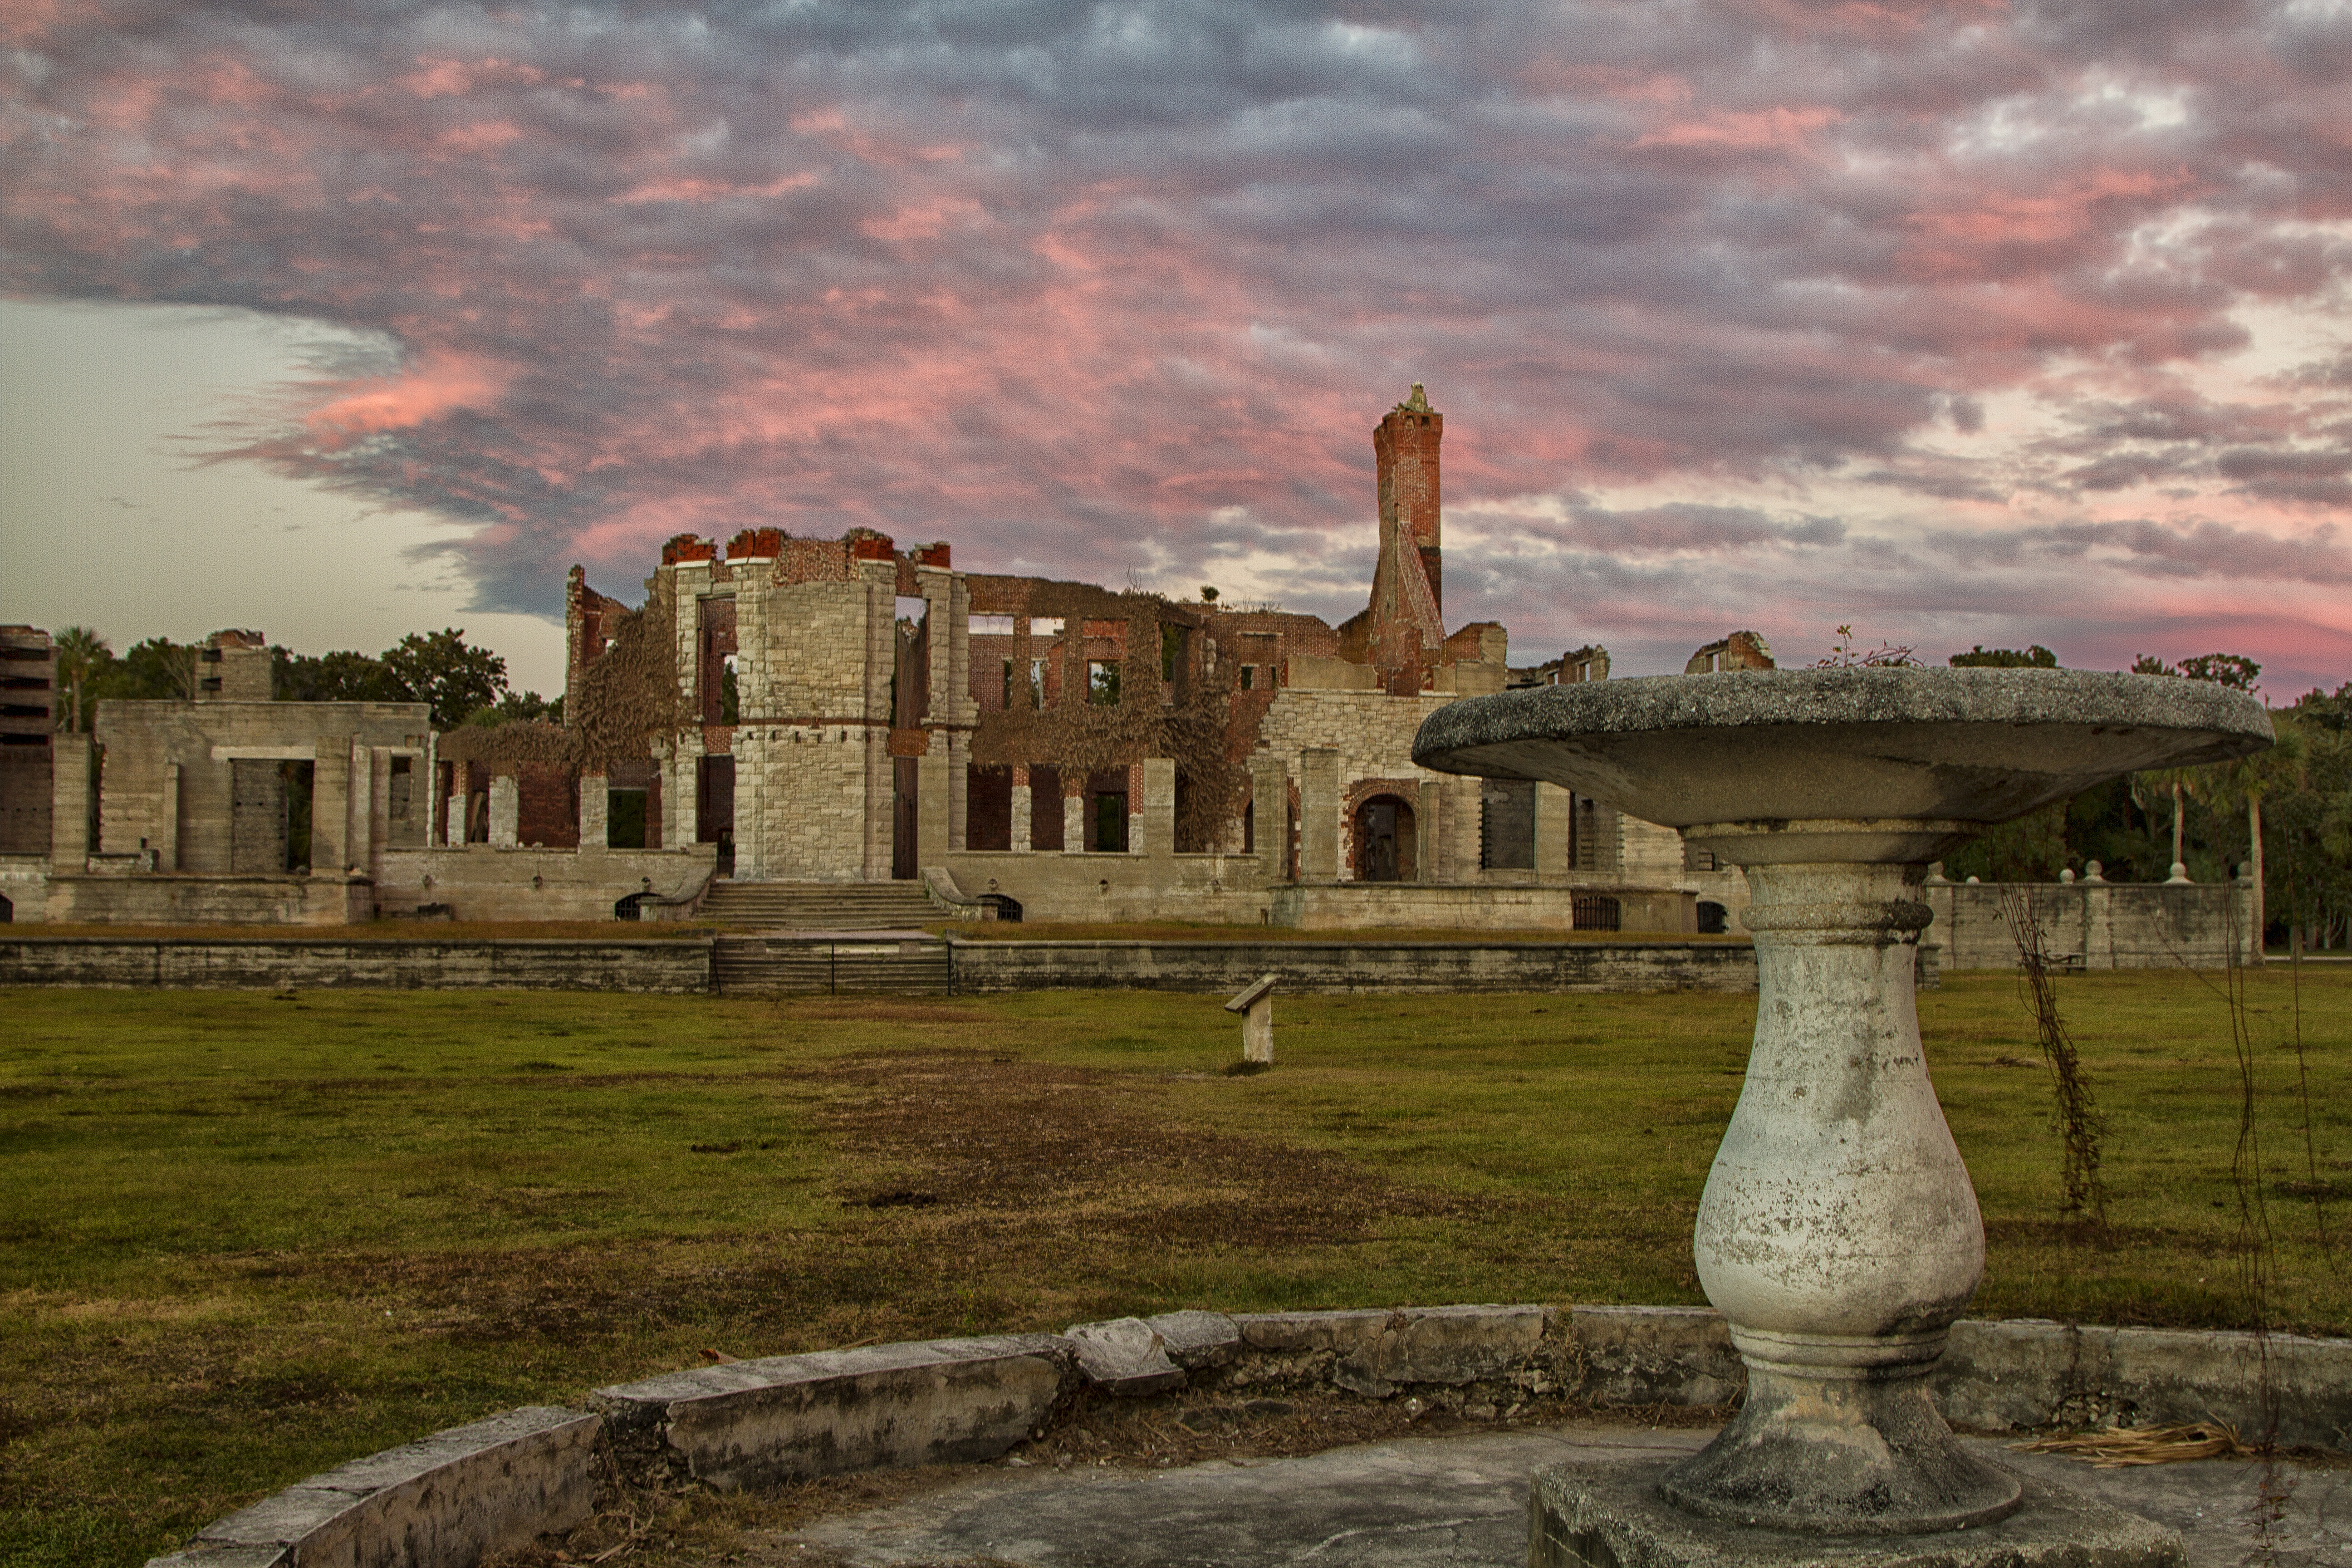 brick and stone ruins of a large mansion at sunset under colorful clouds